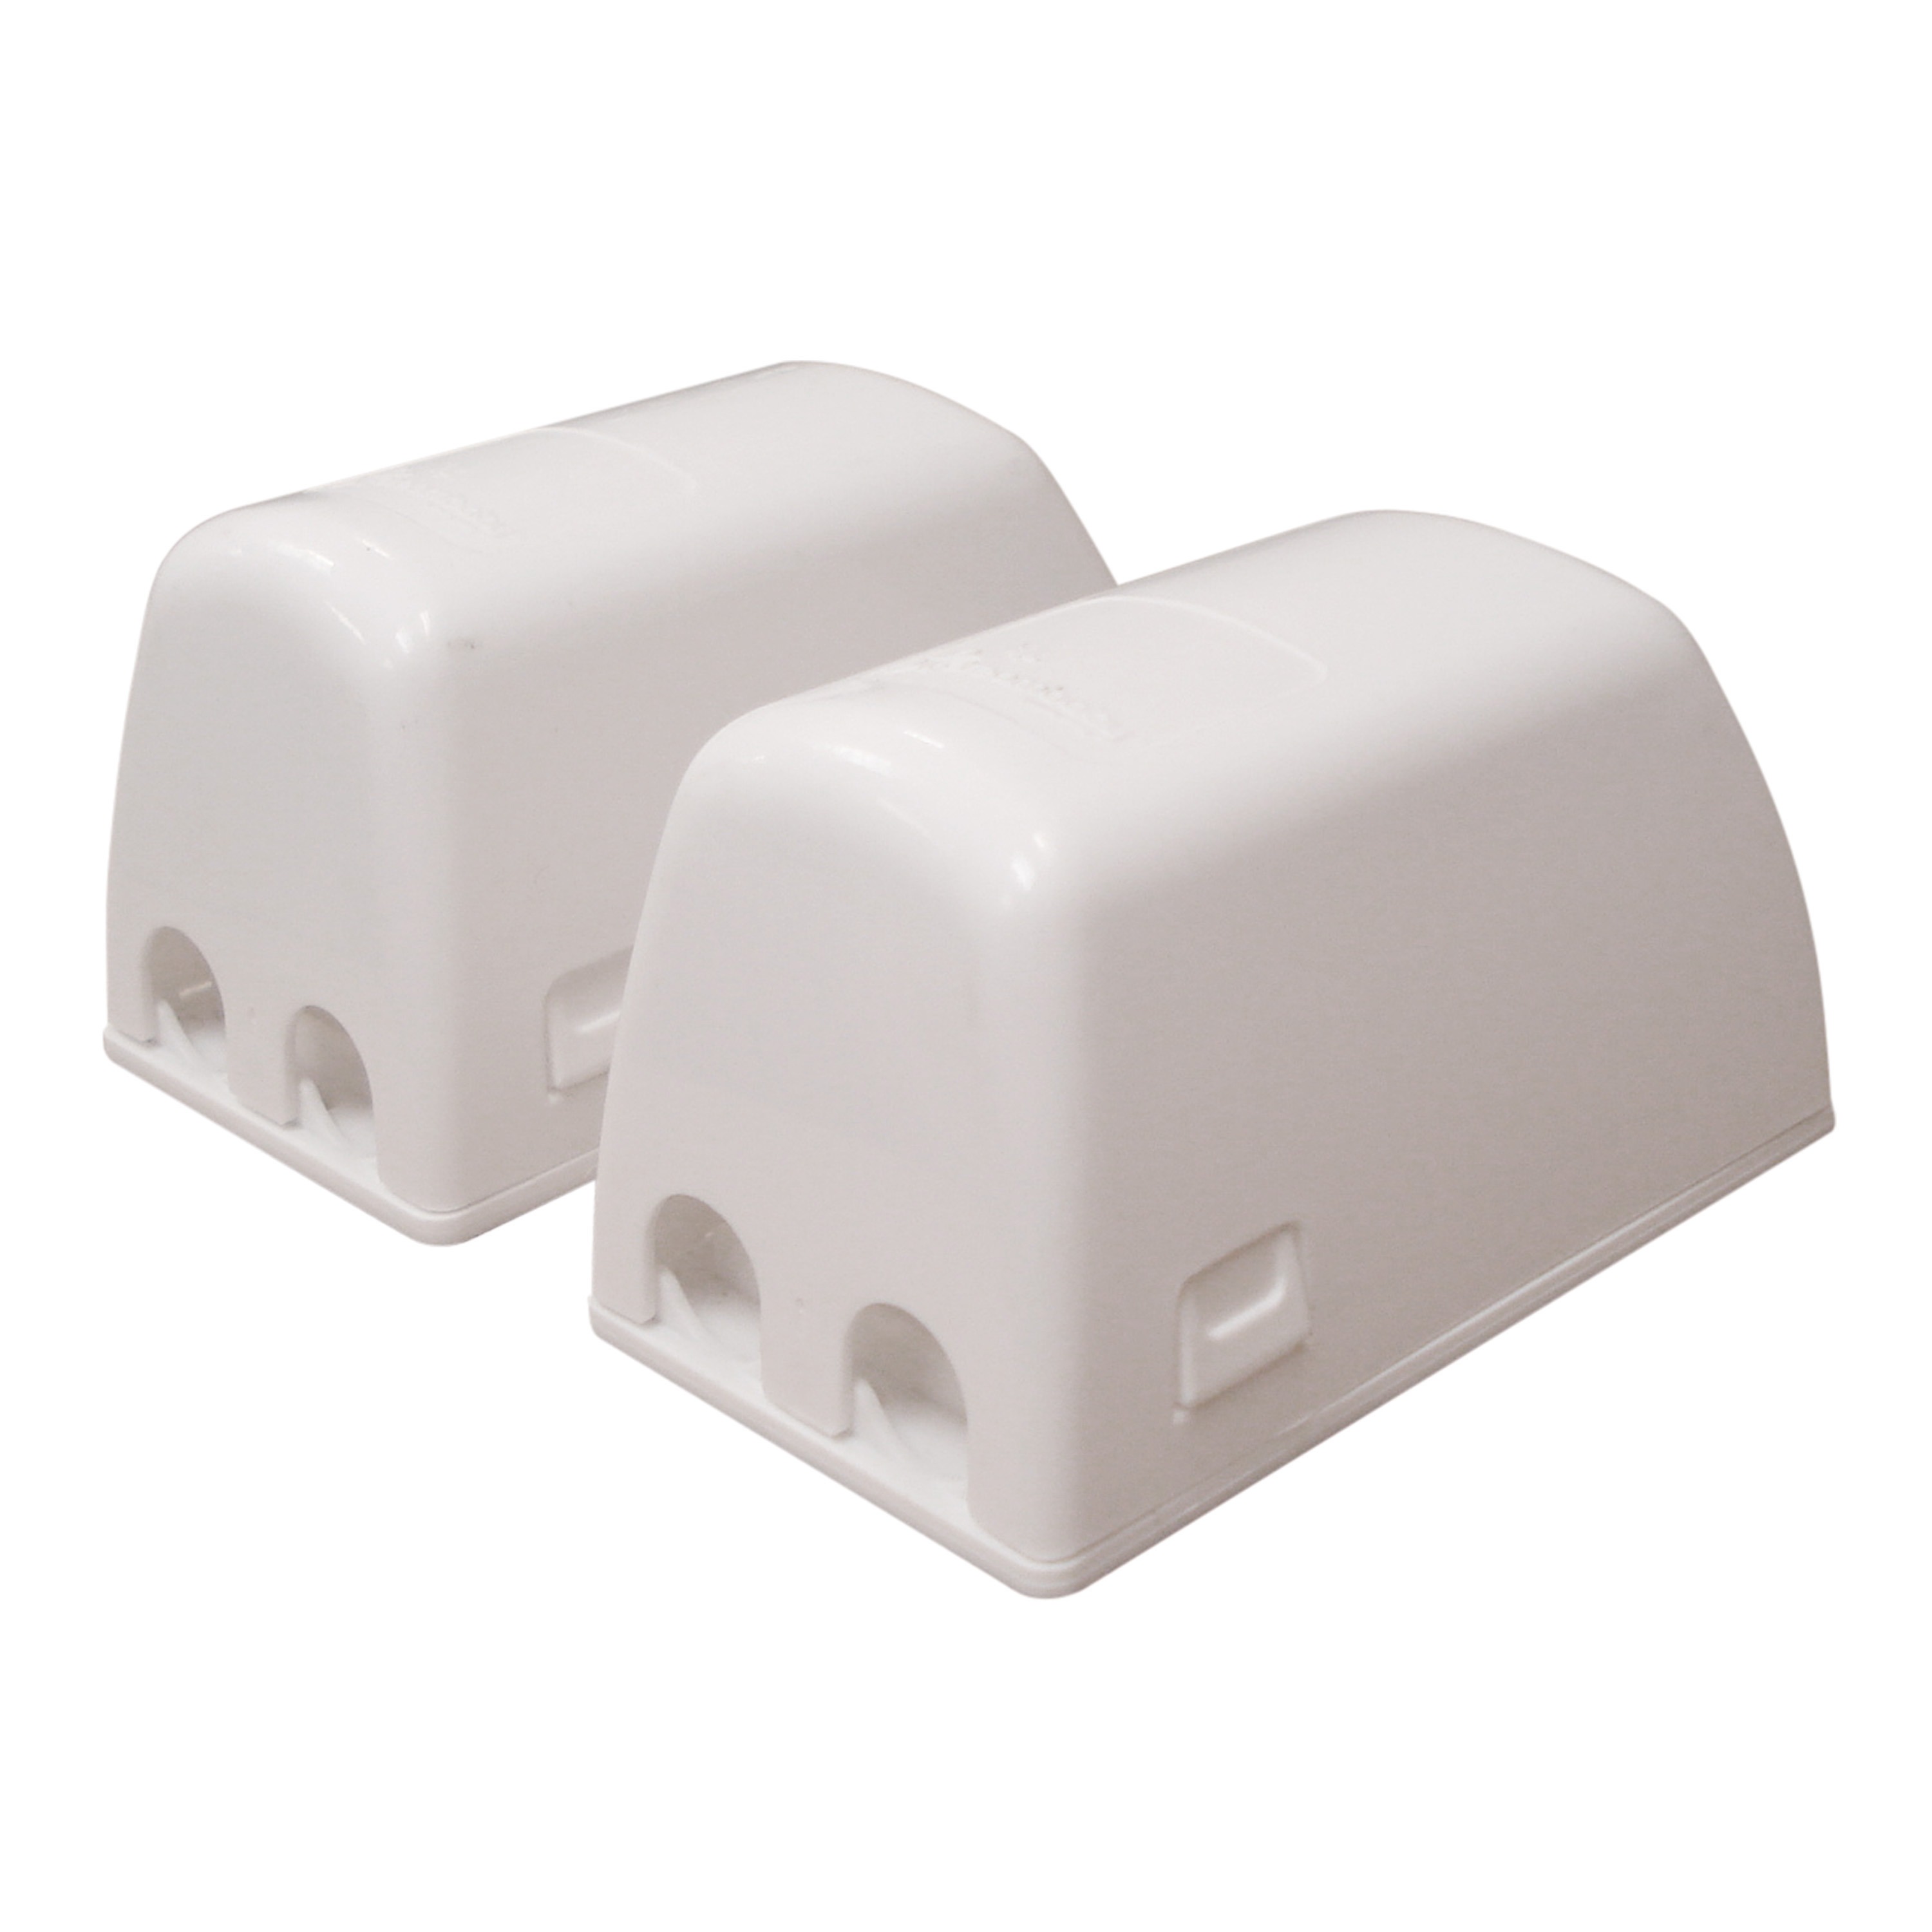 Dreambaby Child Safety White Outlet Covers 2-Pack in the Child